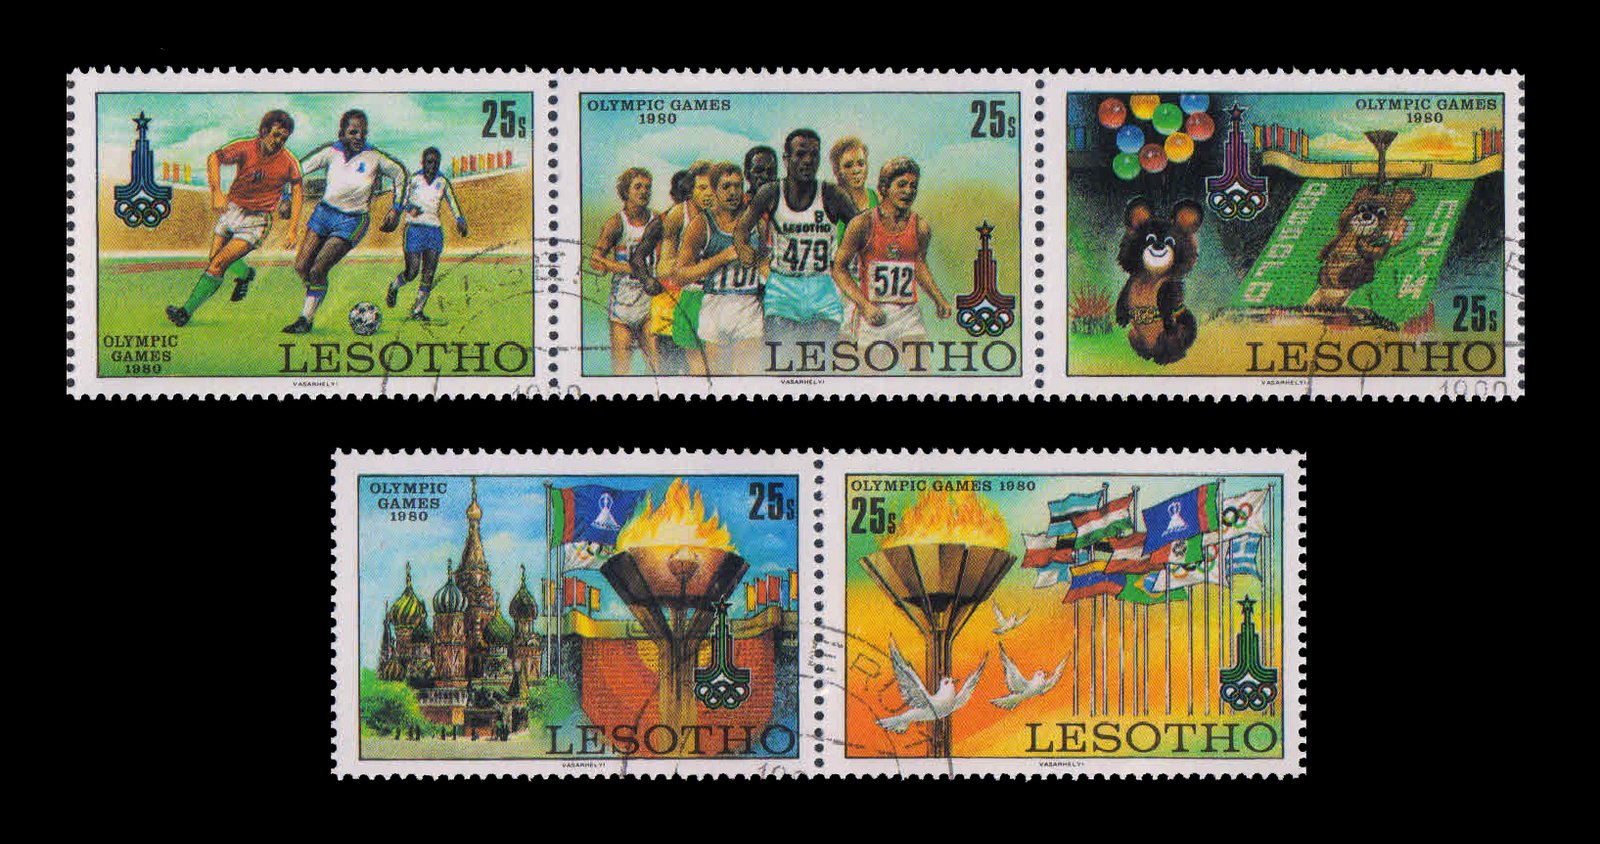 LESOTHO 1980 - Olympic Games, Moscow, Flame, Flag and Kremlin, Opening Ceremony, Football, Set of 5, Cancelled, S.G. 392-396